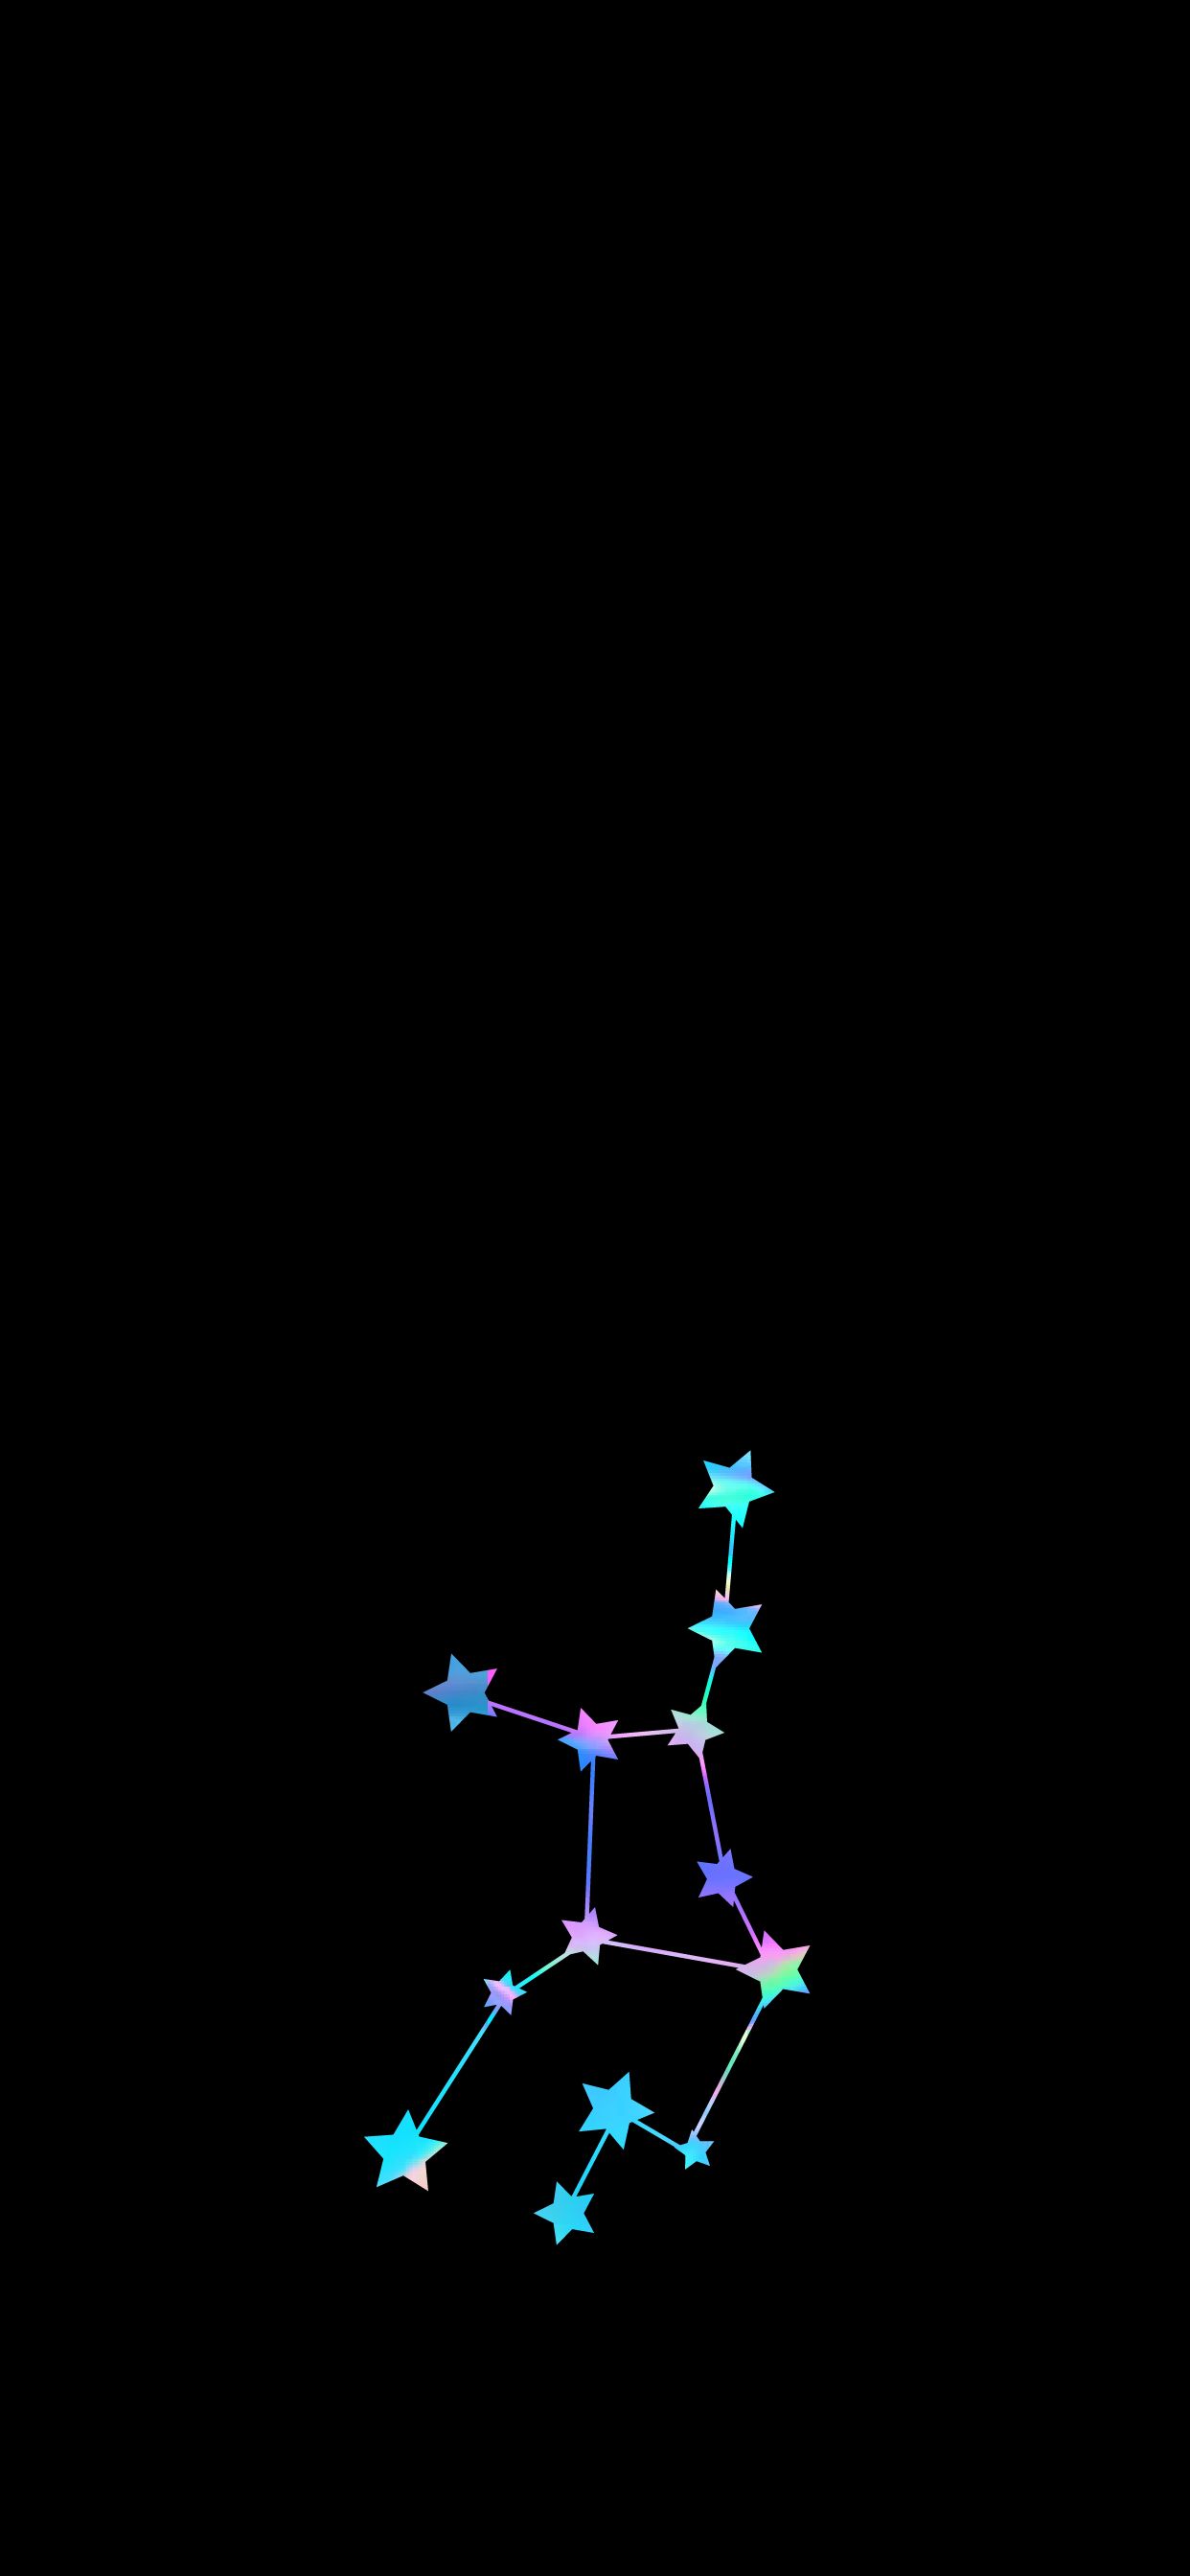 A black background with a blue and purple star constellation in the middle - Virgo